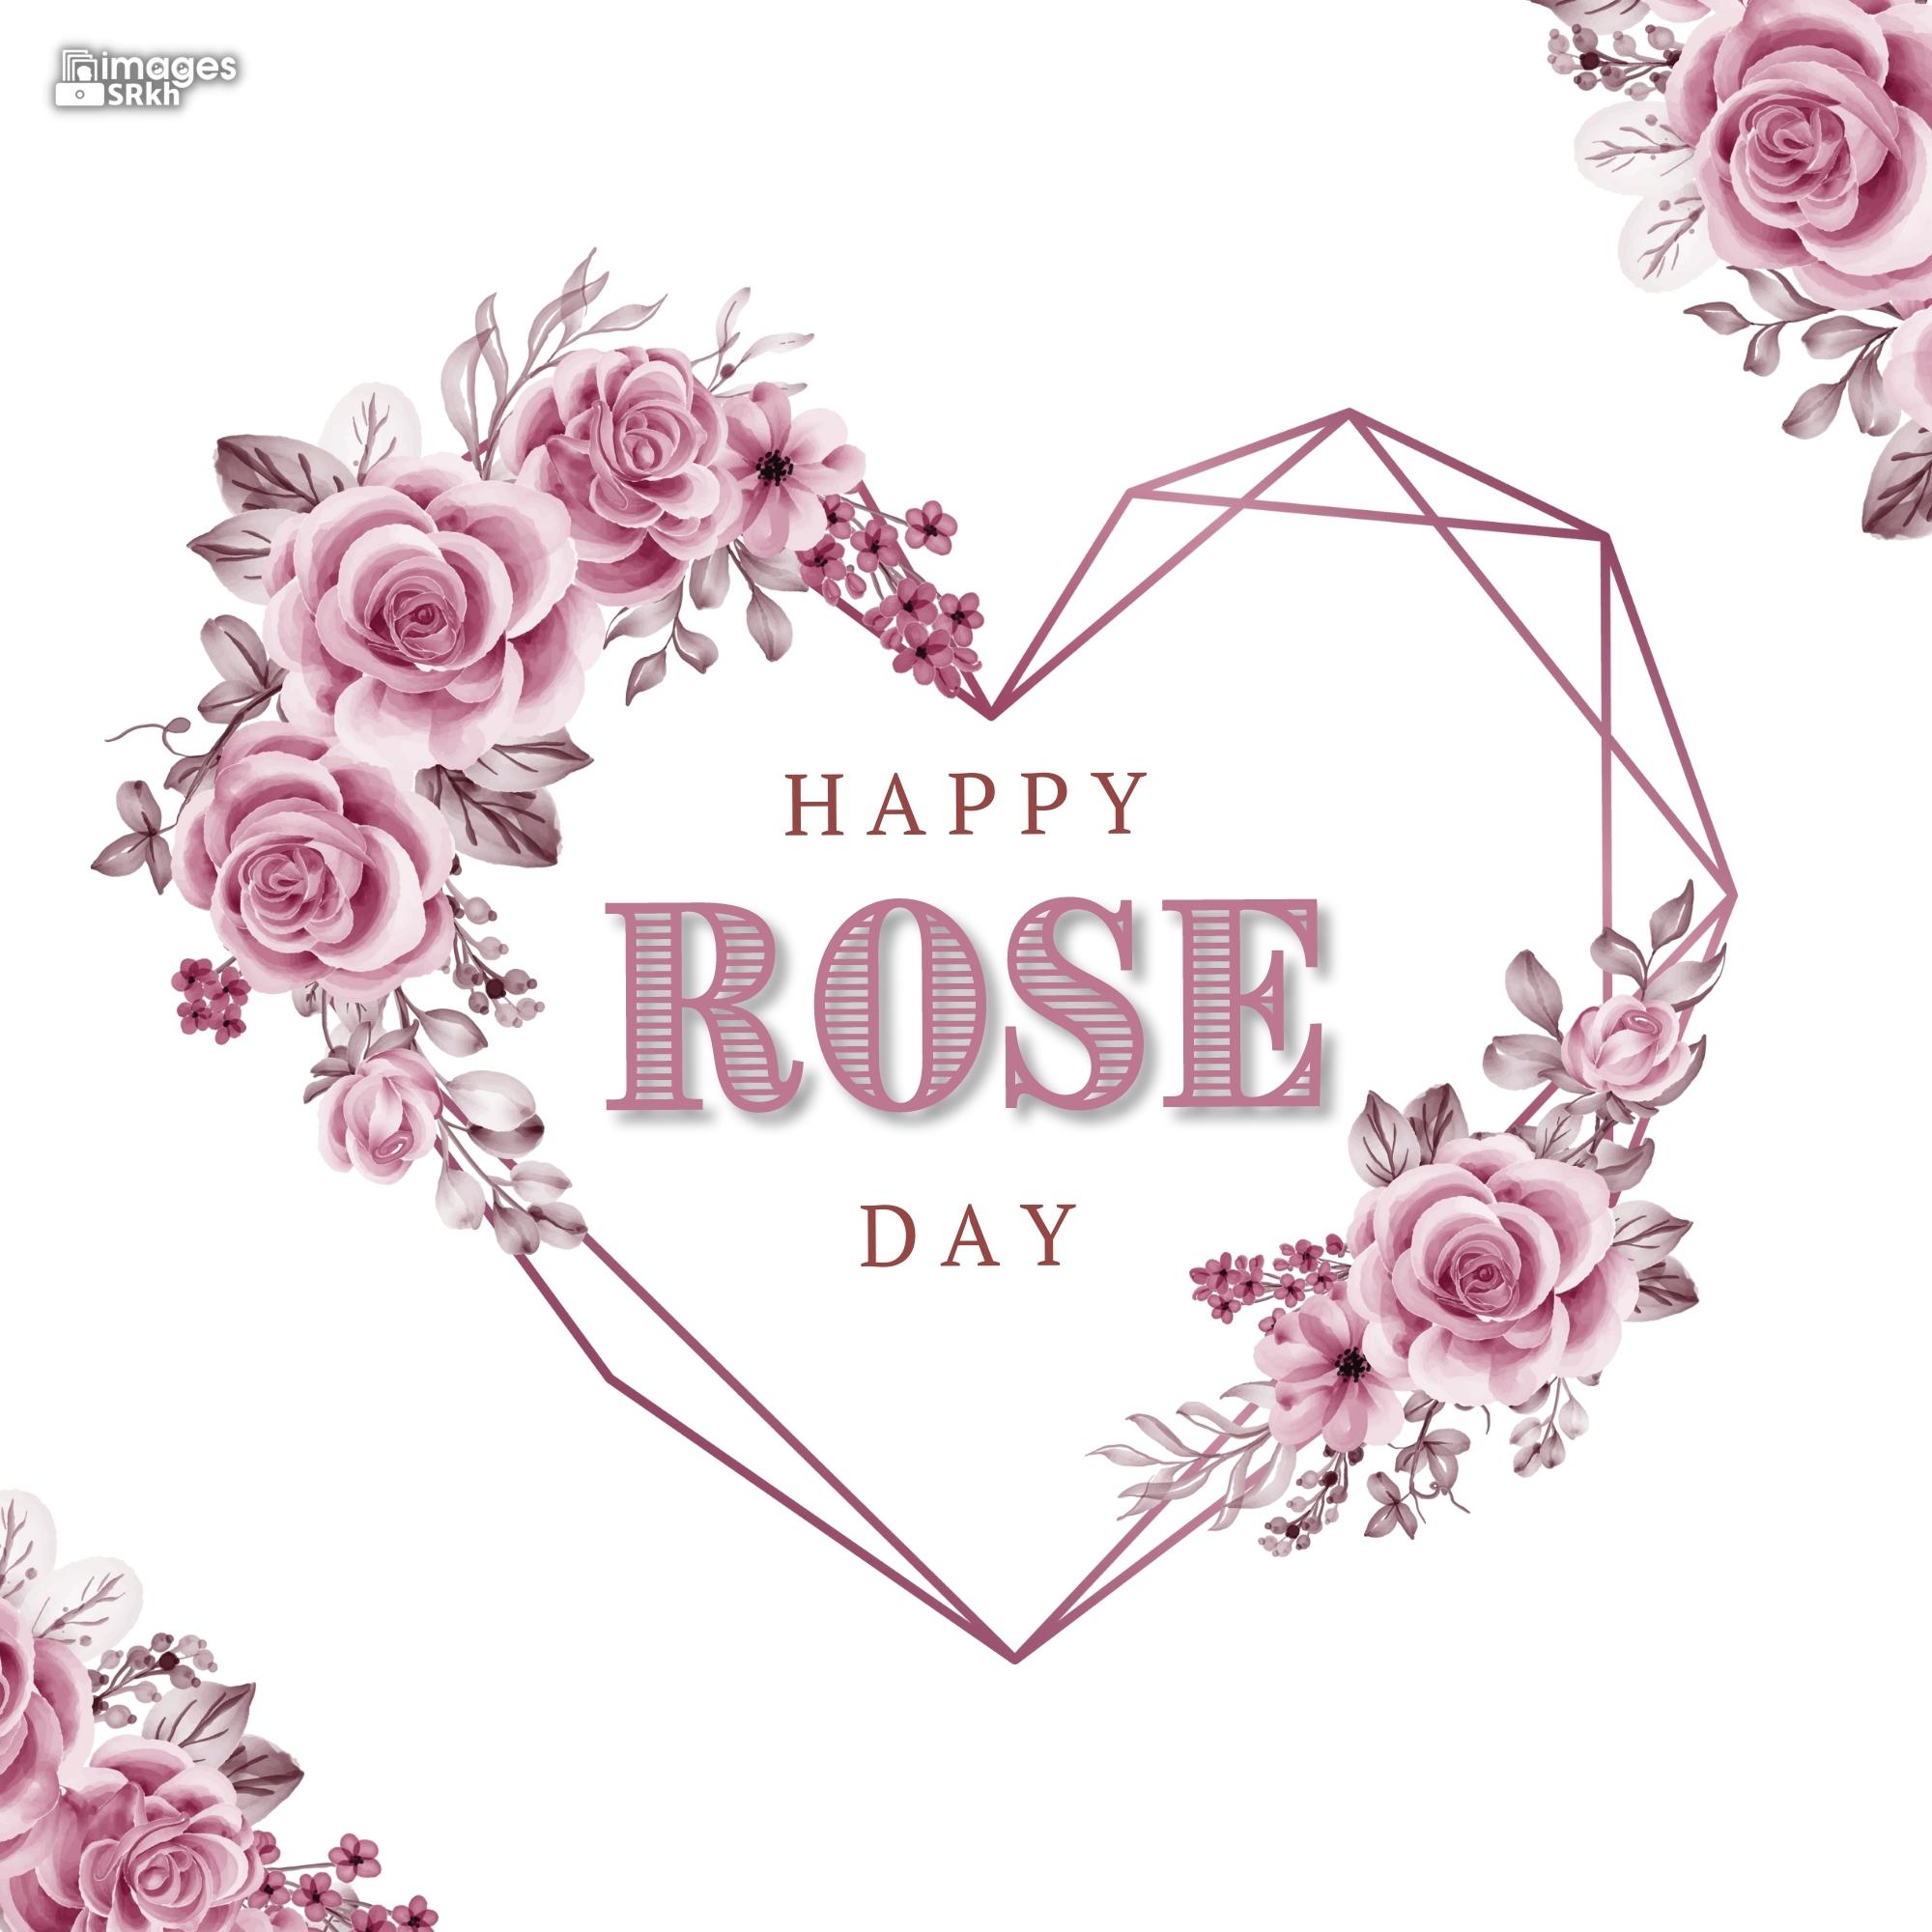 Happy Rose Day Image Hd Download (61)